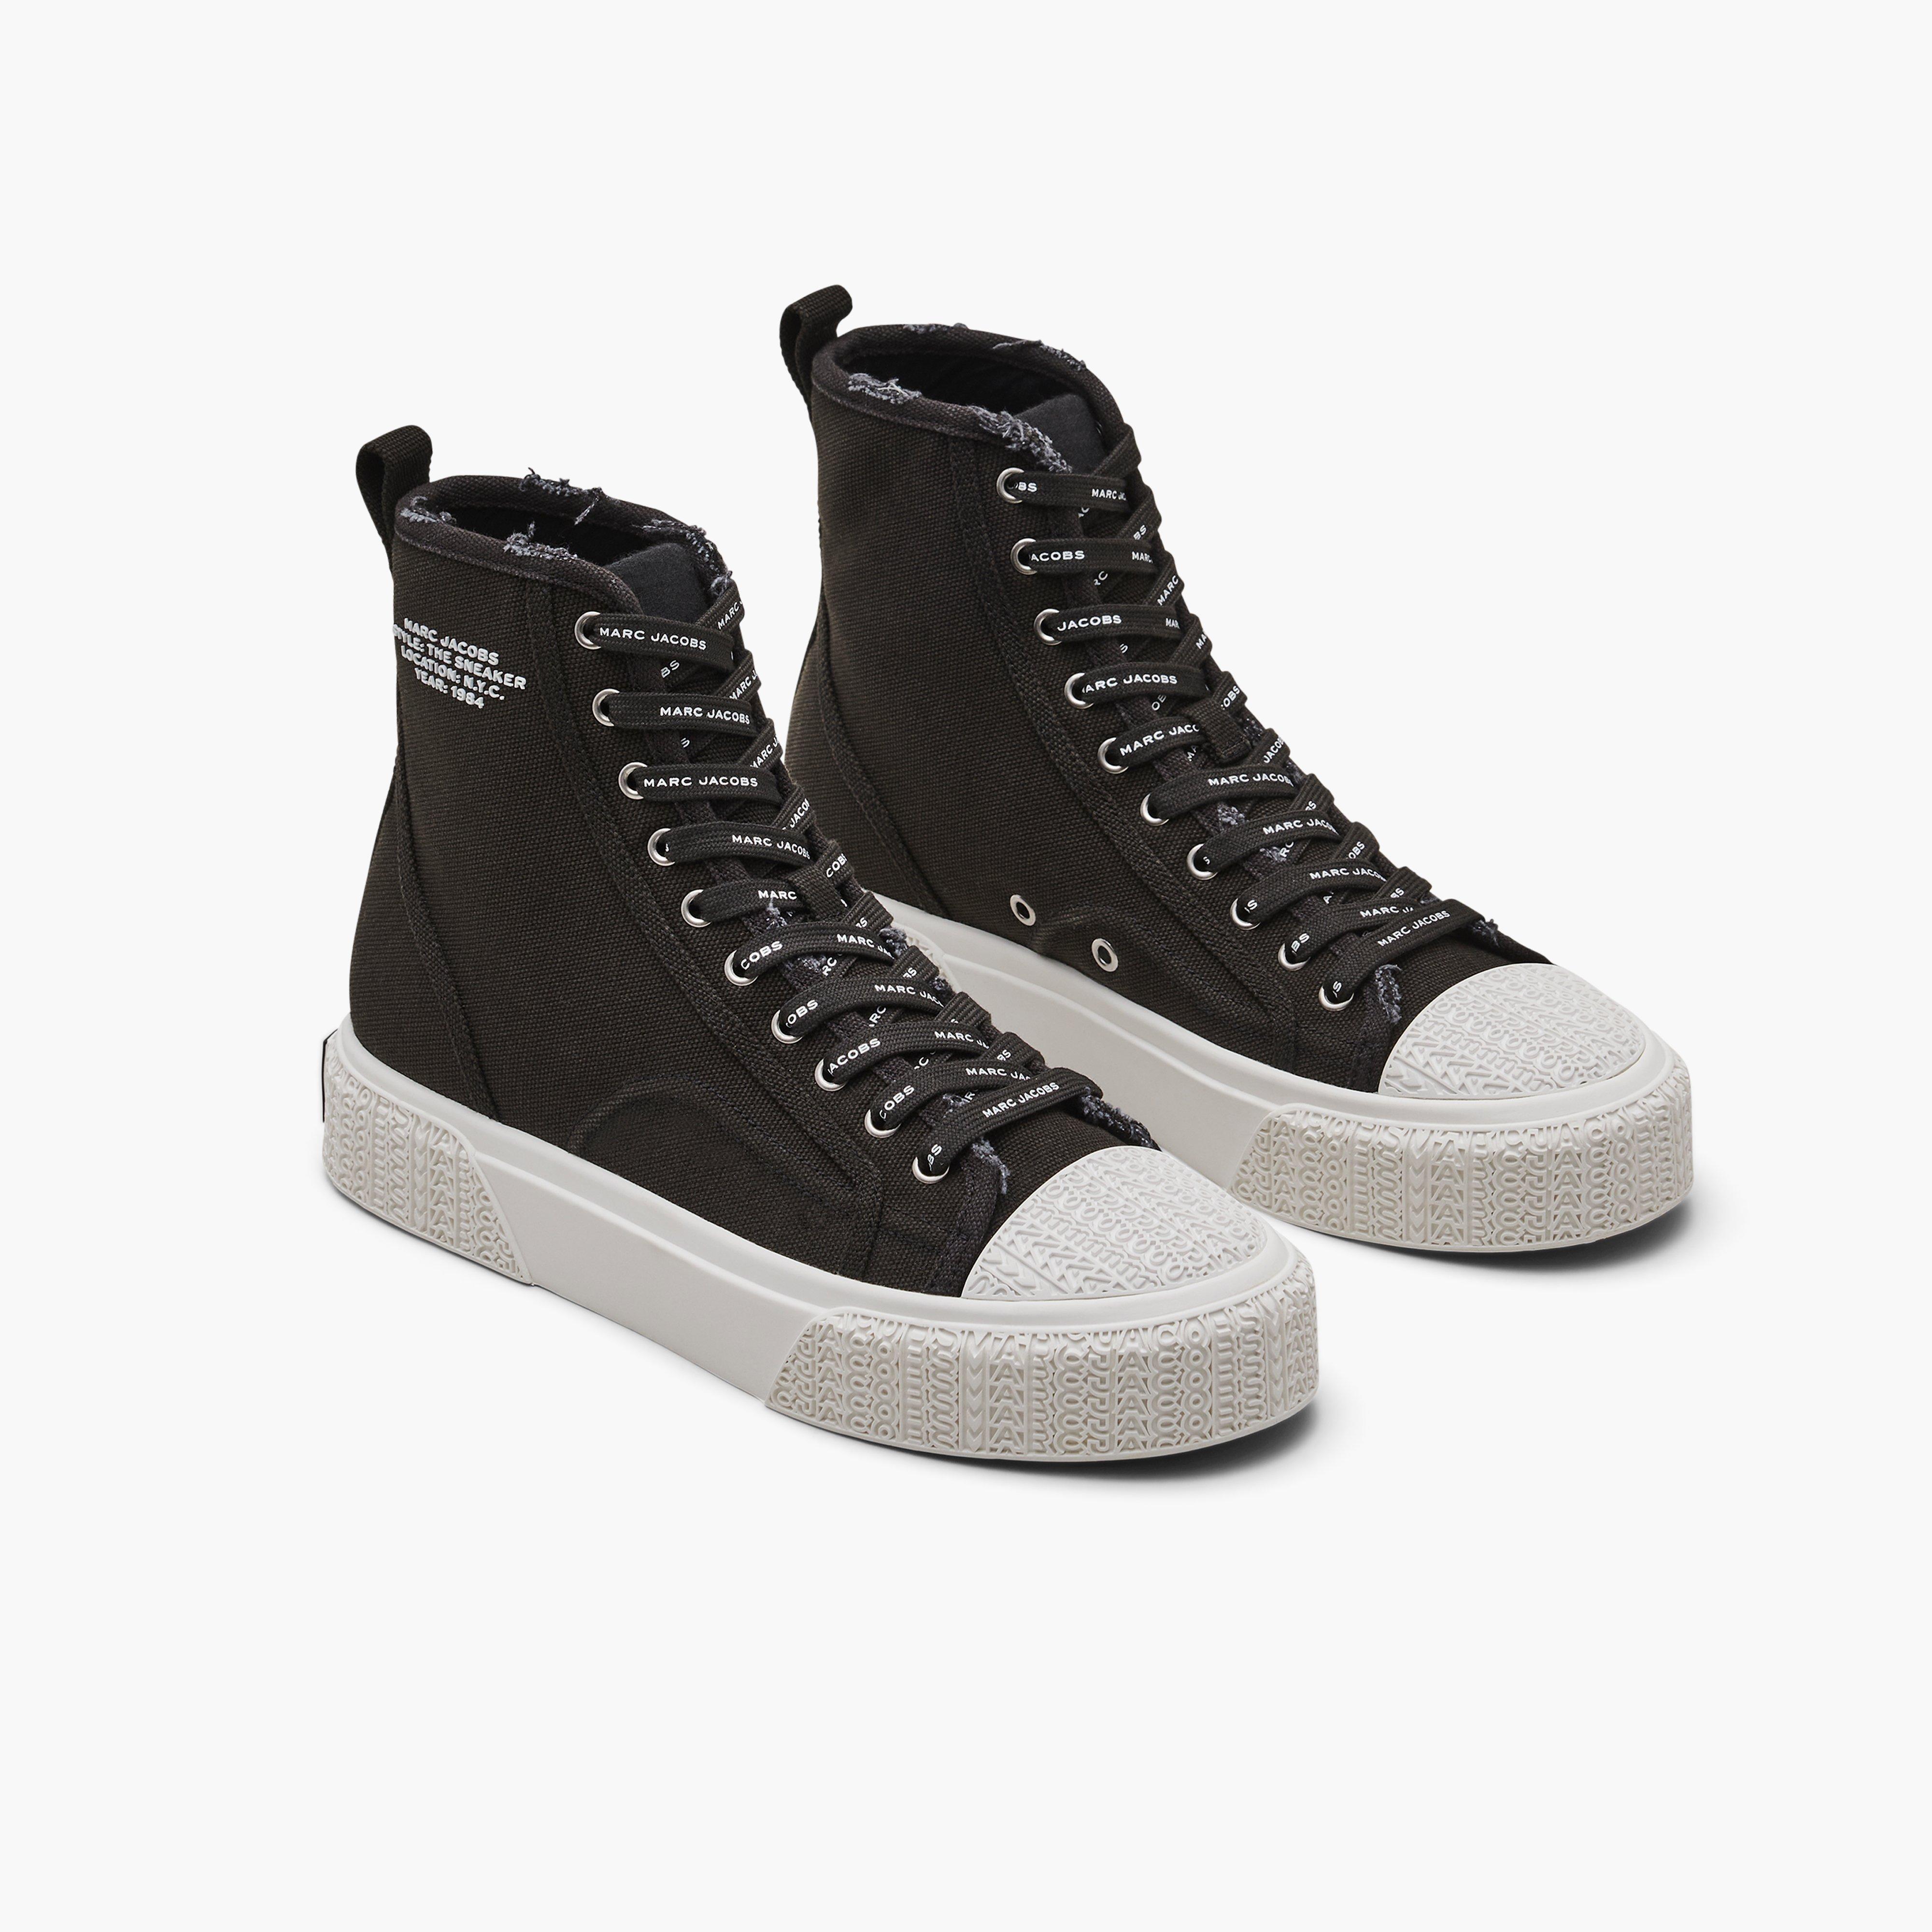 Marc by Marc jacobs The High Top Sneaker,BLACK